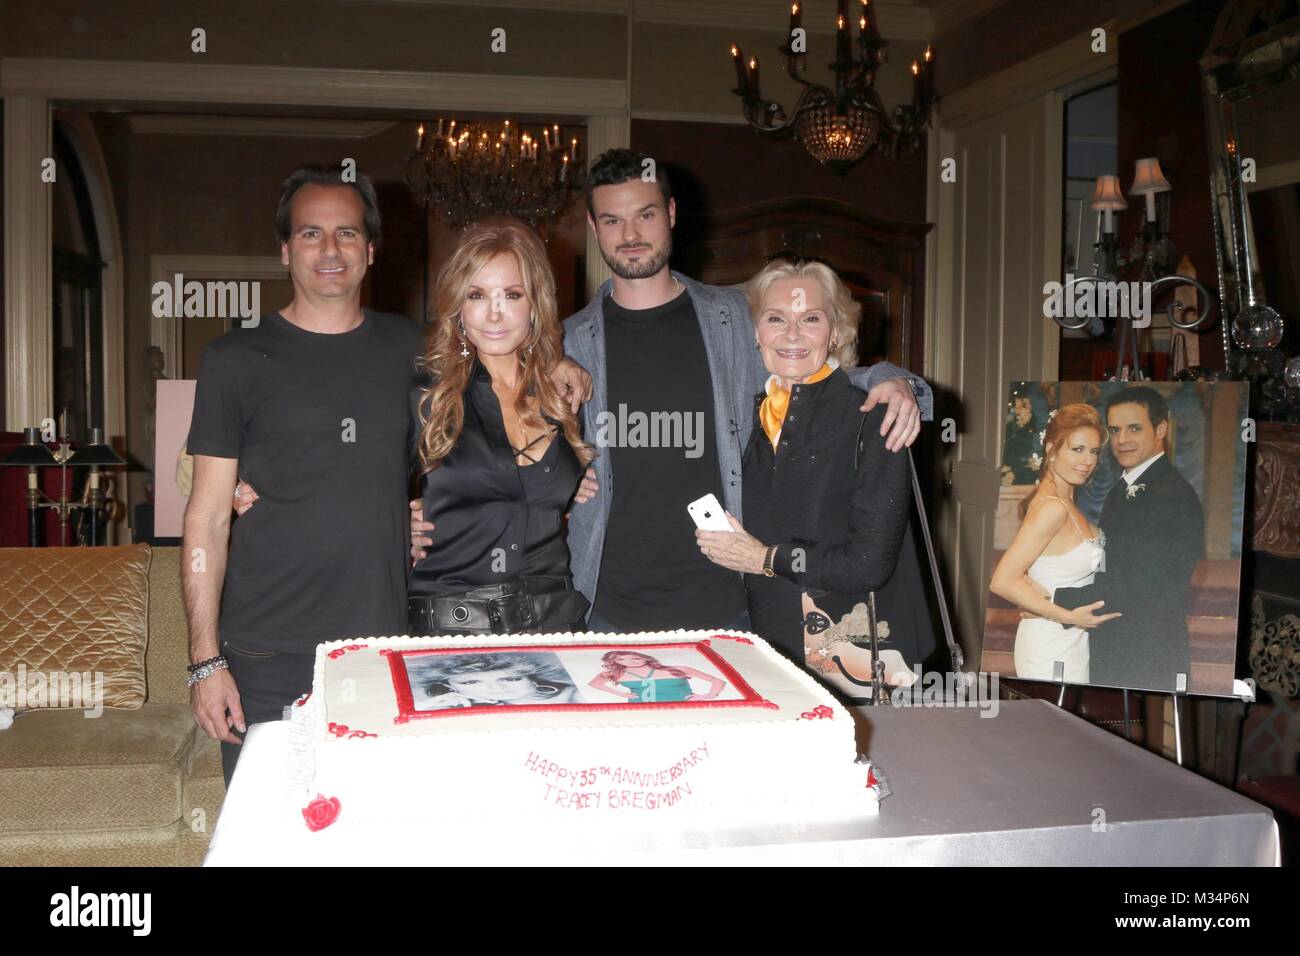 Ari Soffer, Tracey Bregman, Austin Recht, Suzanne Ll in attendance for Tracey Bregman 35th Anniversary on THE YOUNG AND THE RESTLESS, CBS TV City, Los Angeles, CA February 2, 2018. Photo By: Priscilla Grant/Everett Collection Stock Photo